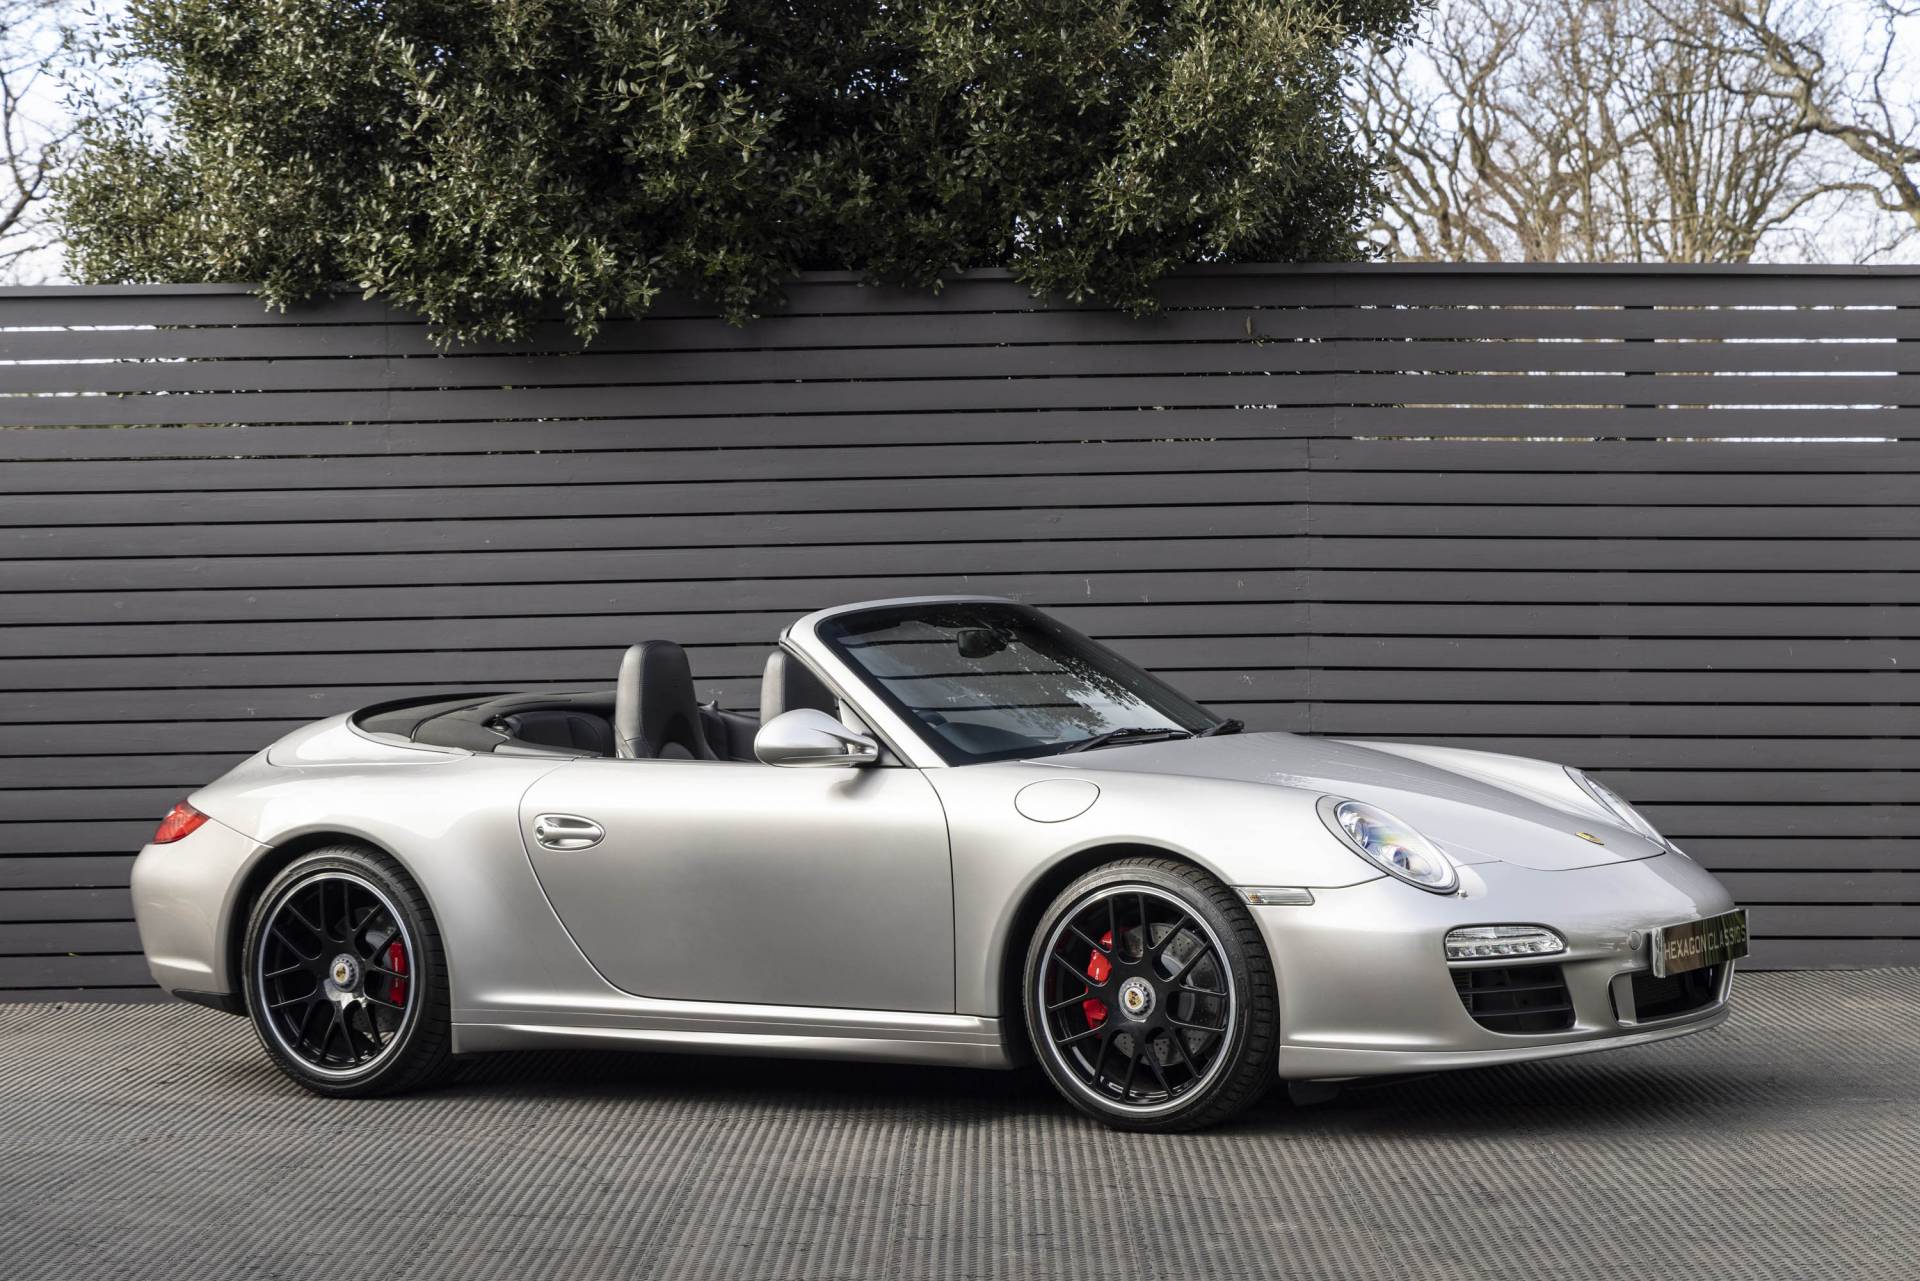 For Sale: Porsche 911 Carrera GTS (2011) offered for GBP 69,995